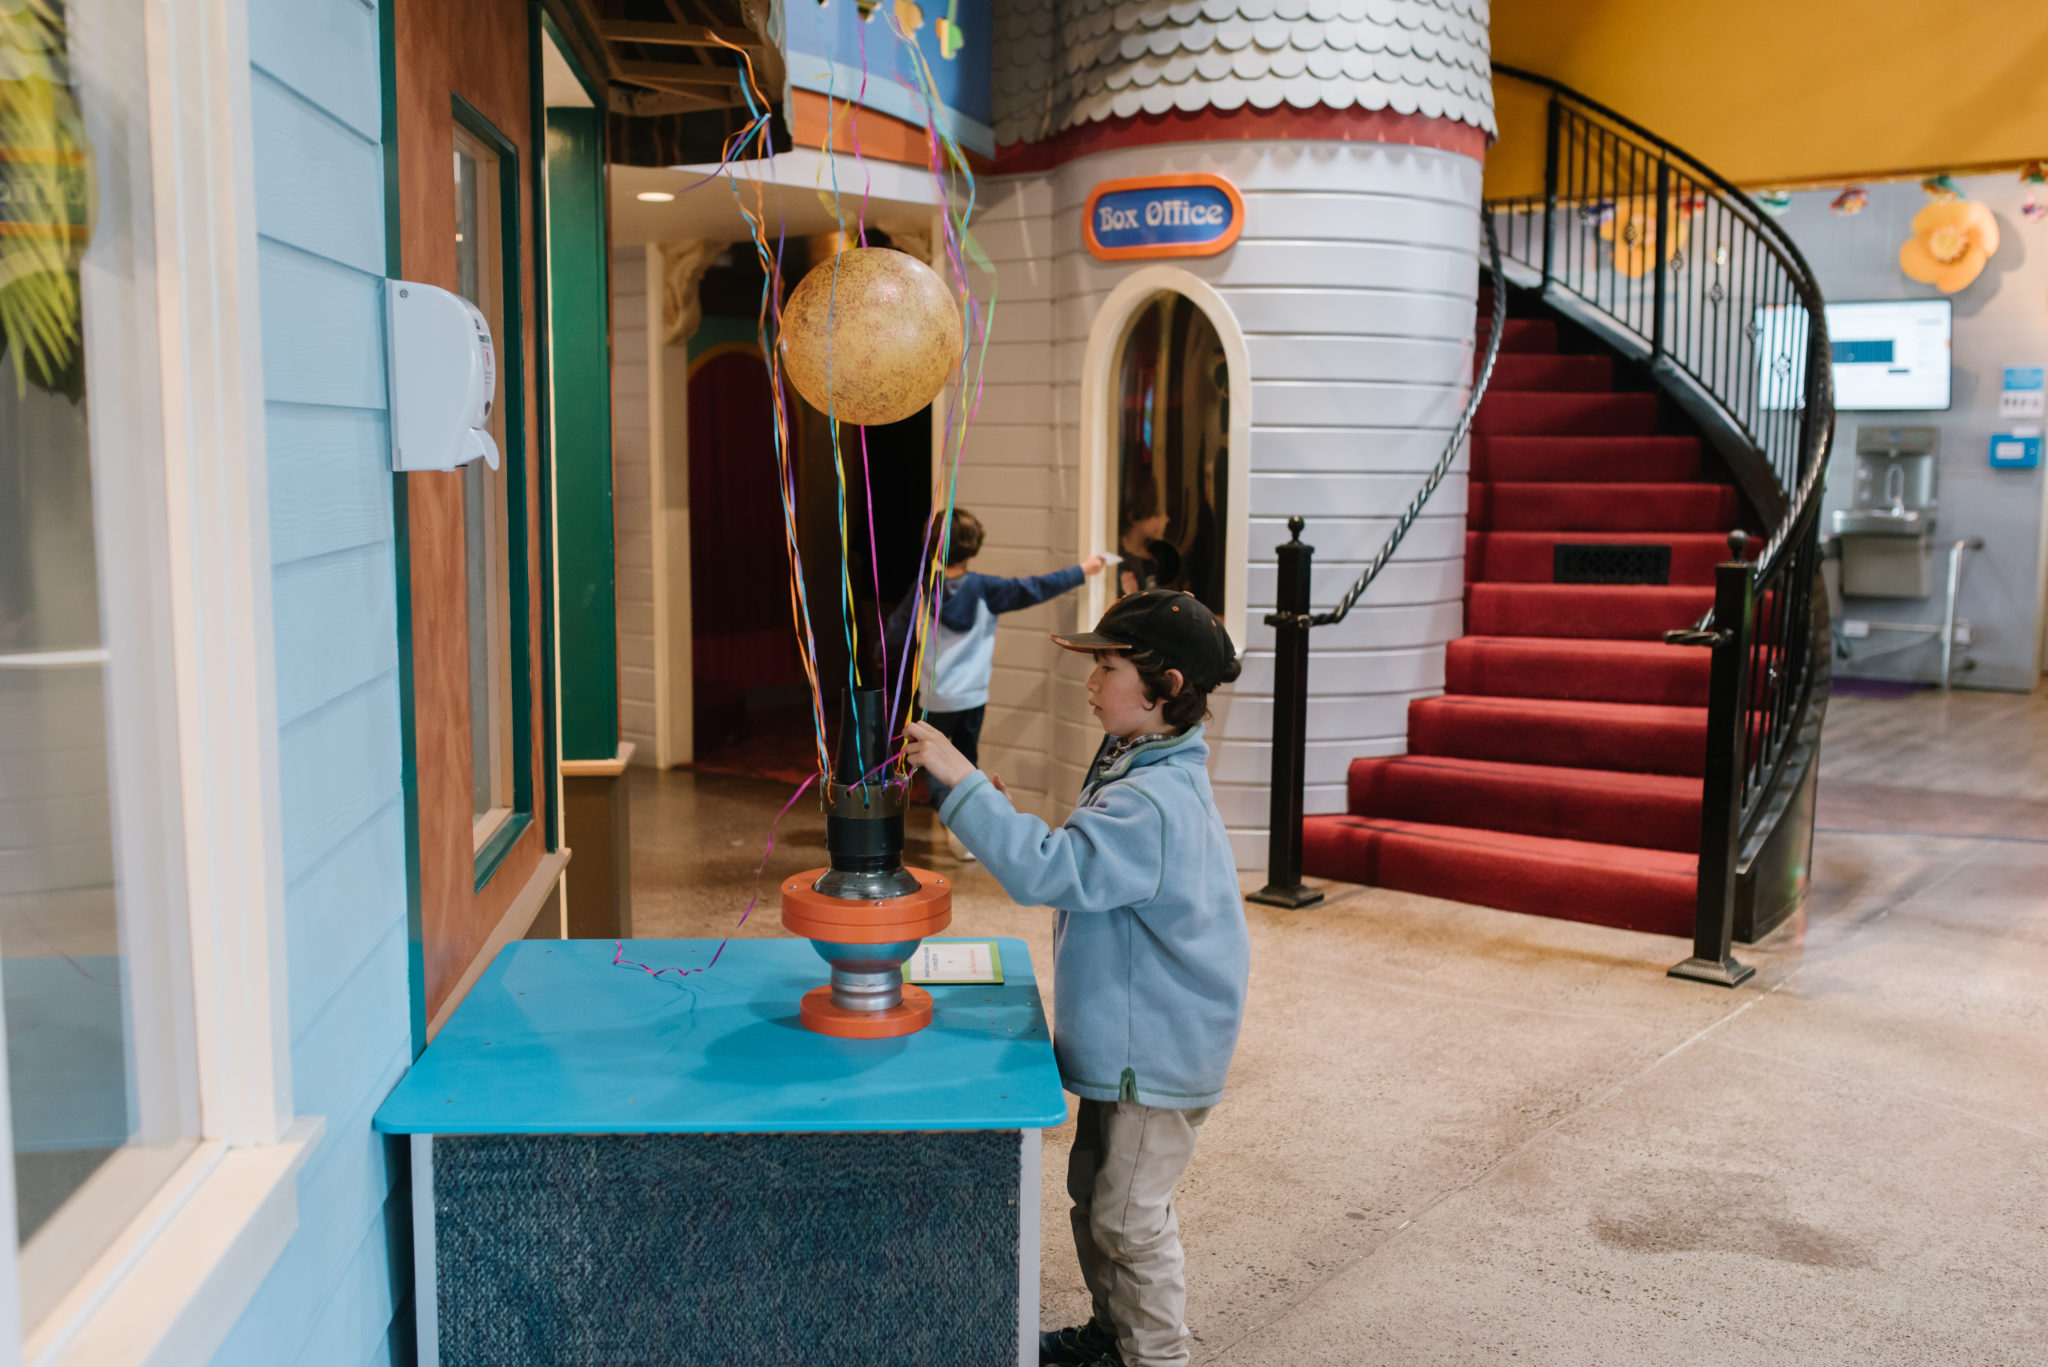 Child playing with Bernoulli Blower exhibit